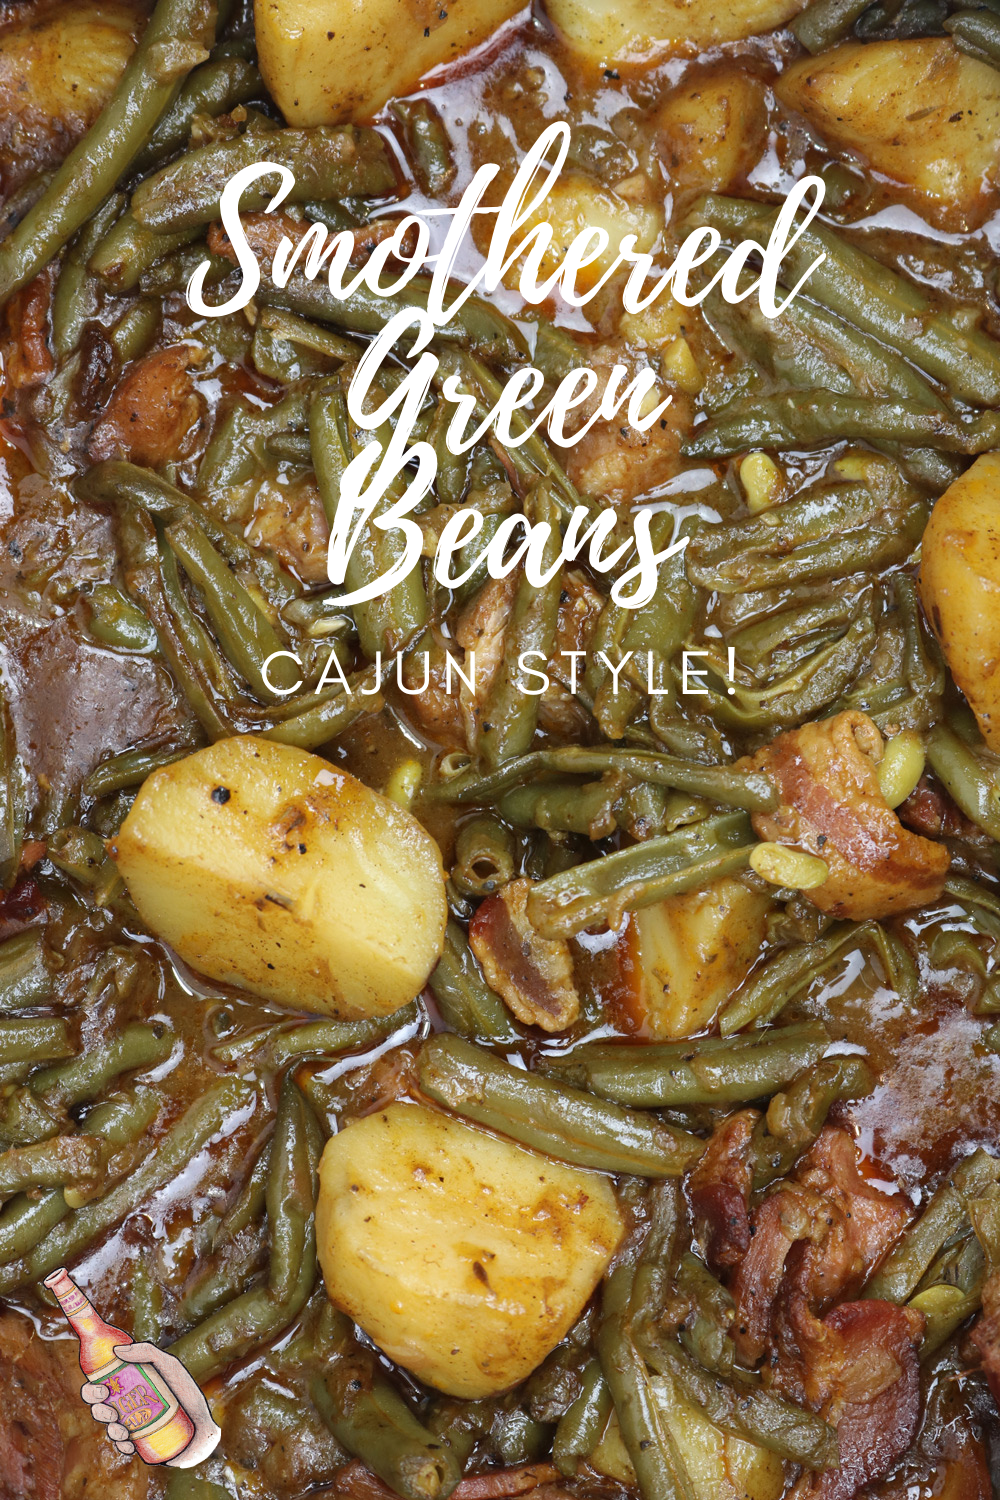 Smothered Green Beans-Cajun Style